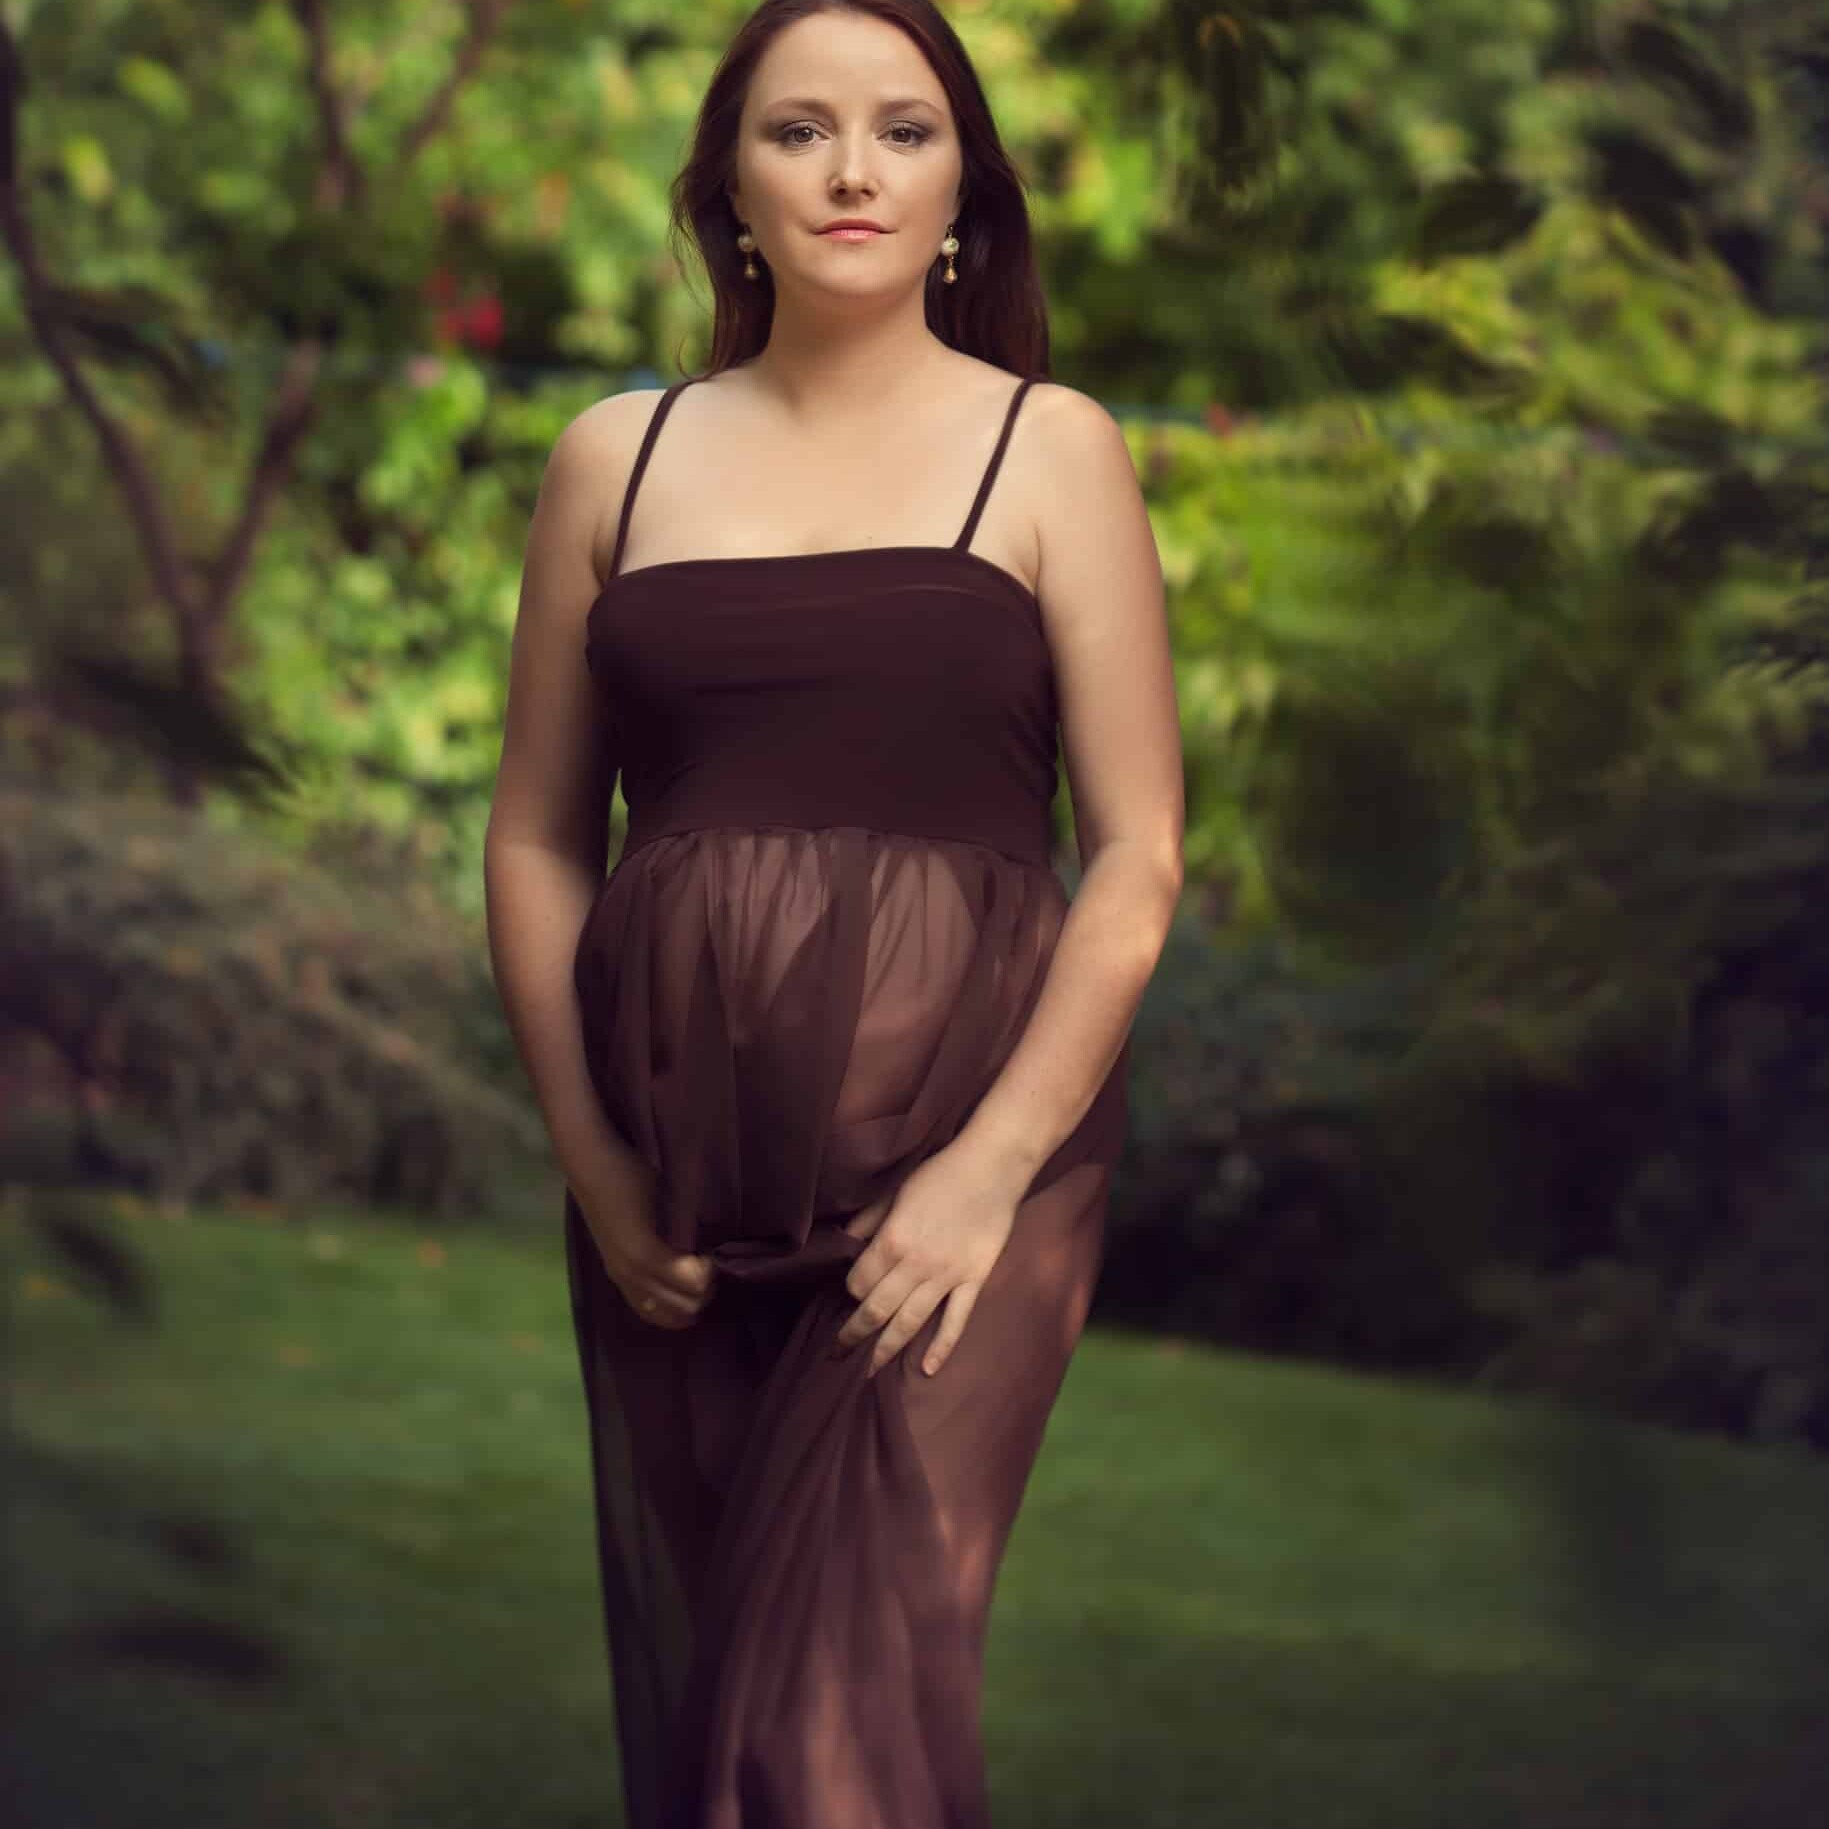 maternity photo session outdoors